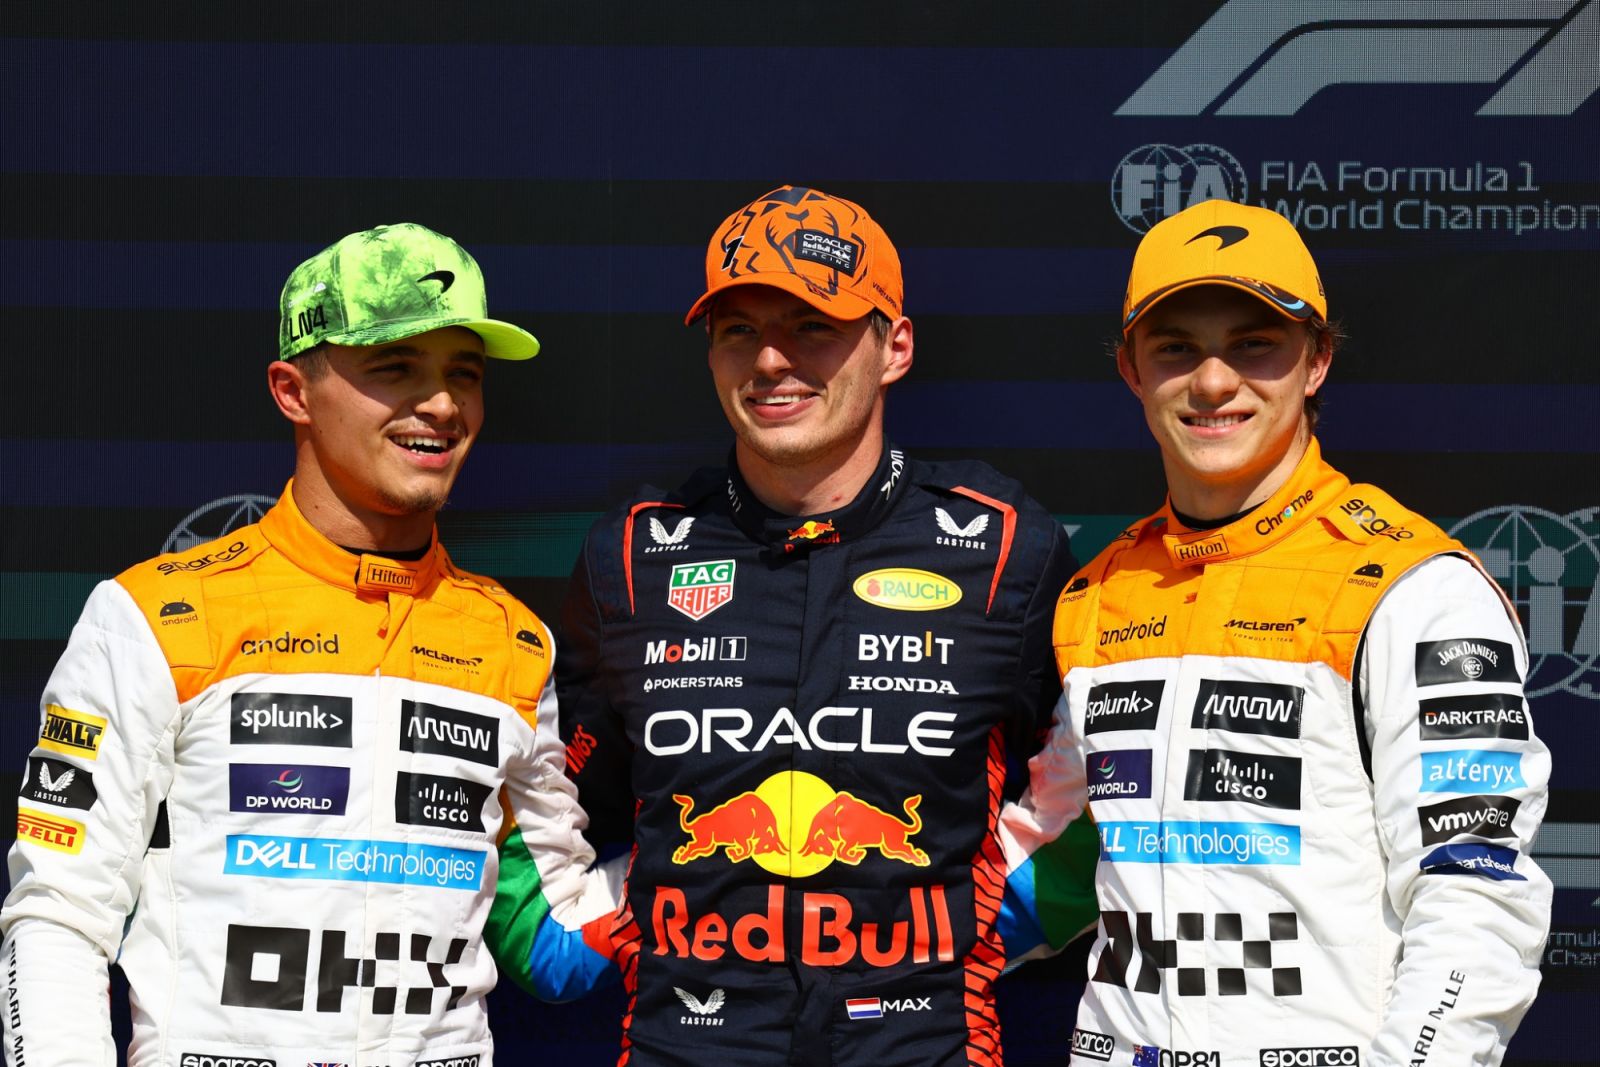 NORTHAMPTON, ENGLAND - JULY 08: Pole position qualifier Max Verstappen of the Netherlands and Oracle Red Bull Racing, Second placed qualifier Lando Norris of Great Britain and McLaren and Third placed qualifier Oscar Piastri of Australia and McLaren pose for a photo in parc ferme during qualifying ahead of the F1 Grand Prix of Great Britain at Silverstone Circuit on July 08, 2023 in Northampton, England. (Photo by Mark Thompson/Getty Images)